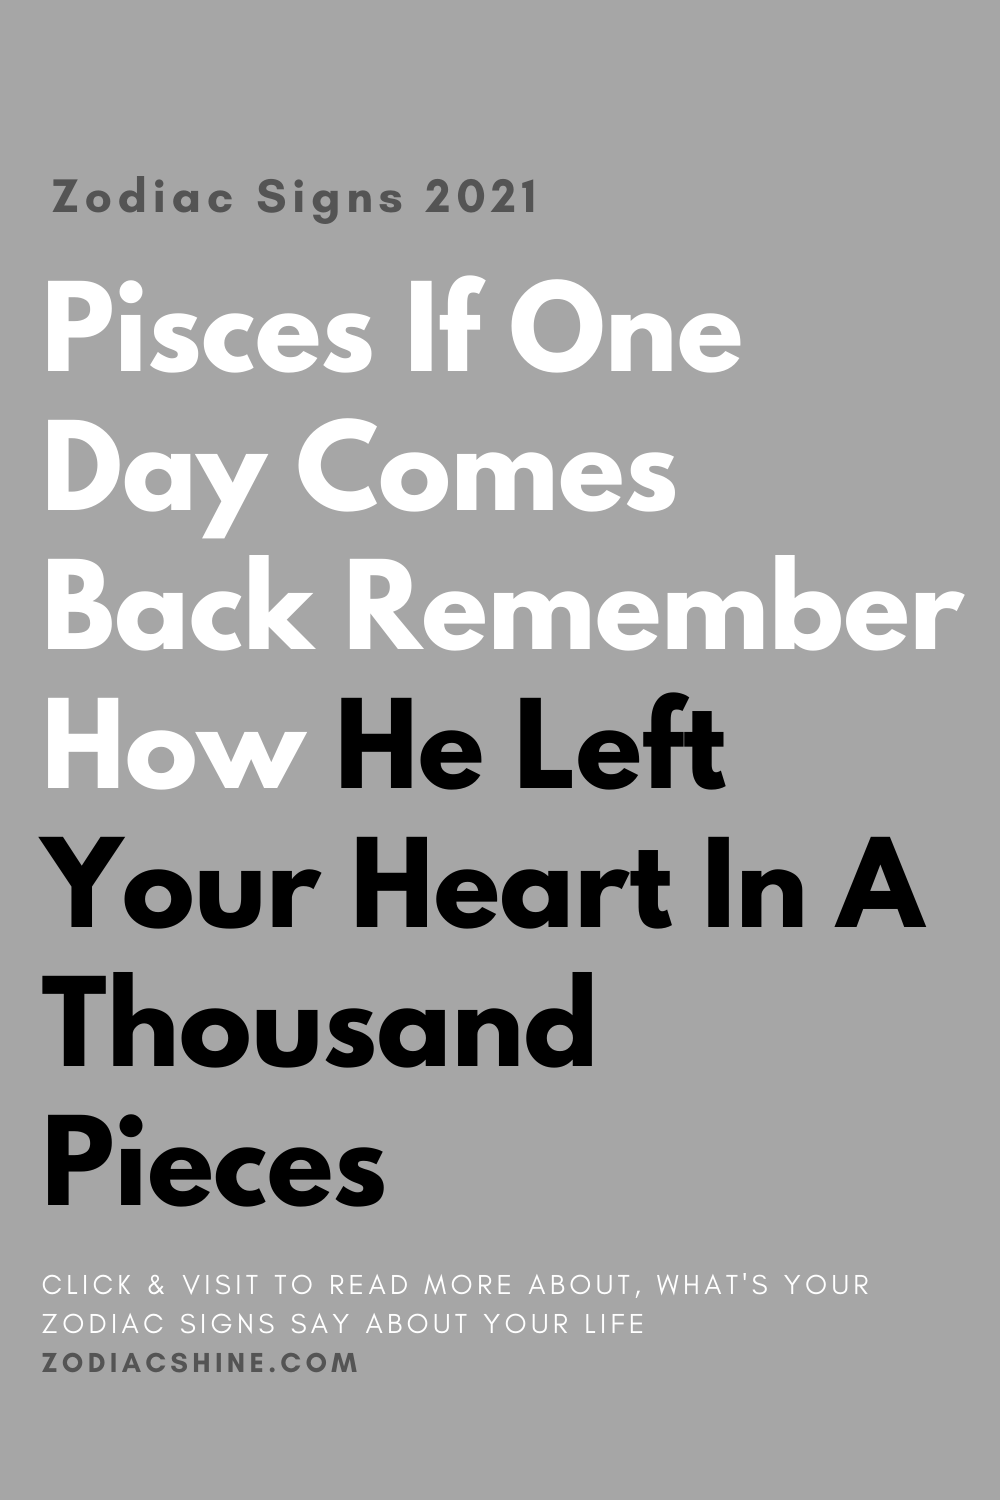 Pisces If One Day Comes Back Remember How He Left Your Heart In A Thousands Pieces